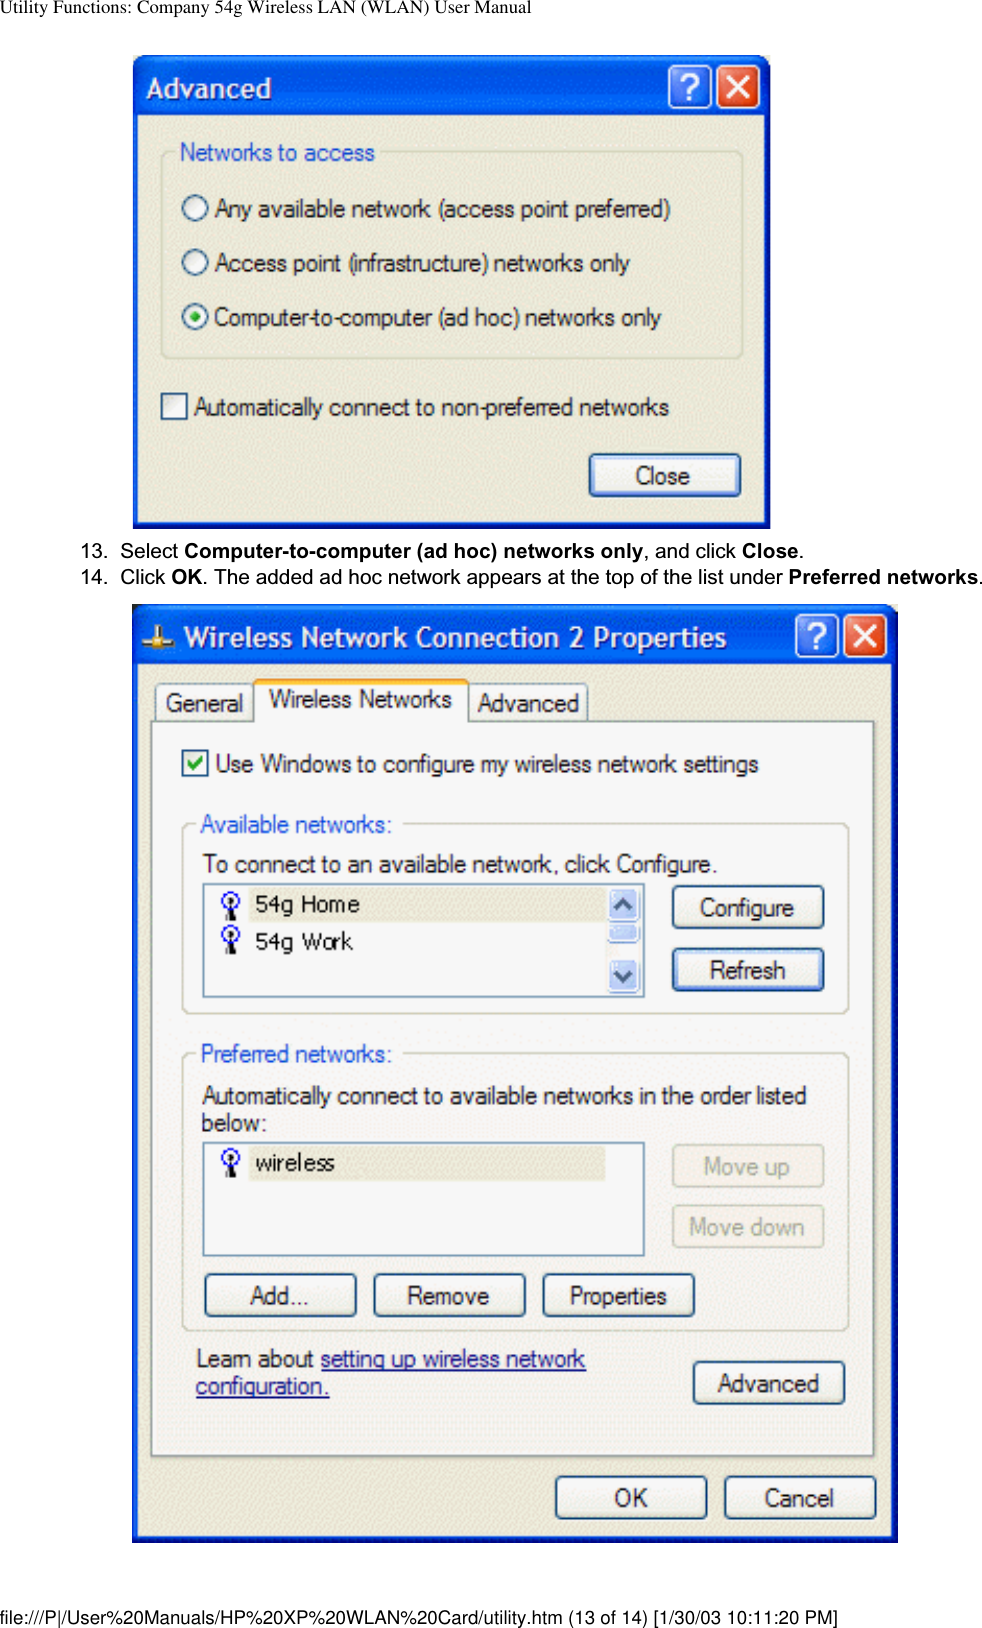 Utility Functions: Company 54g Wireless LAN (WLAN) User Manual13. Select Computer-to-computer (ad hoc) networks only, and click Close.14. Click OK. The added ad hoc network appears at the top of the list under Preferred networks.file:///P|/User%20Manuals/HP%20XP%20WLAN%20Card/utility.htm (13 of 14) [1/30/03 10:11:20 PM]